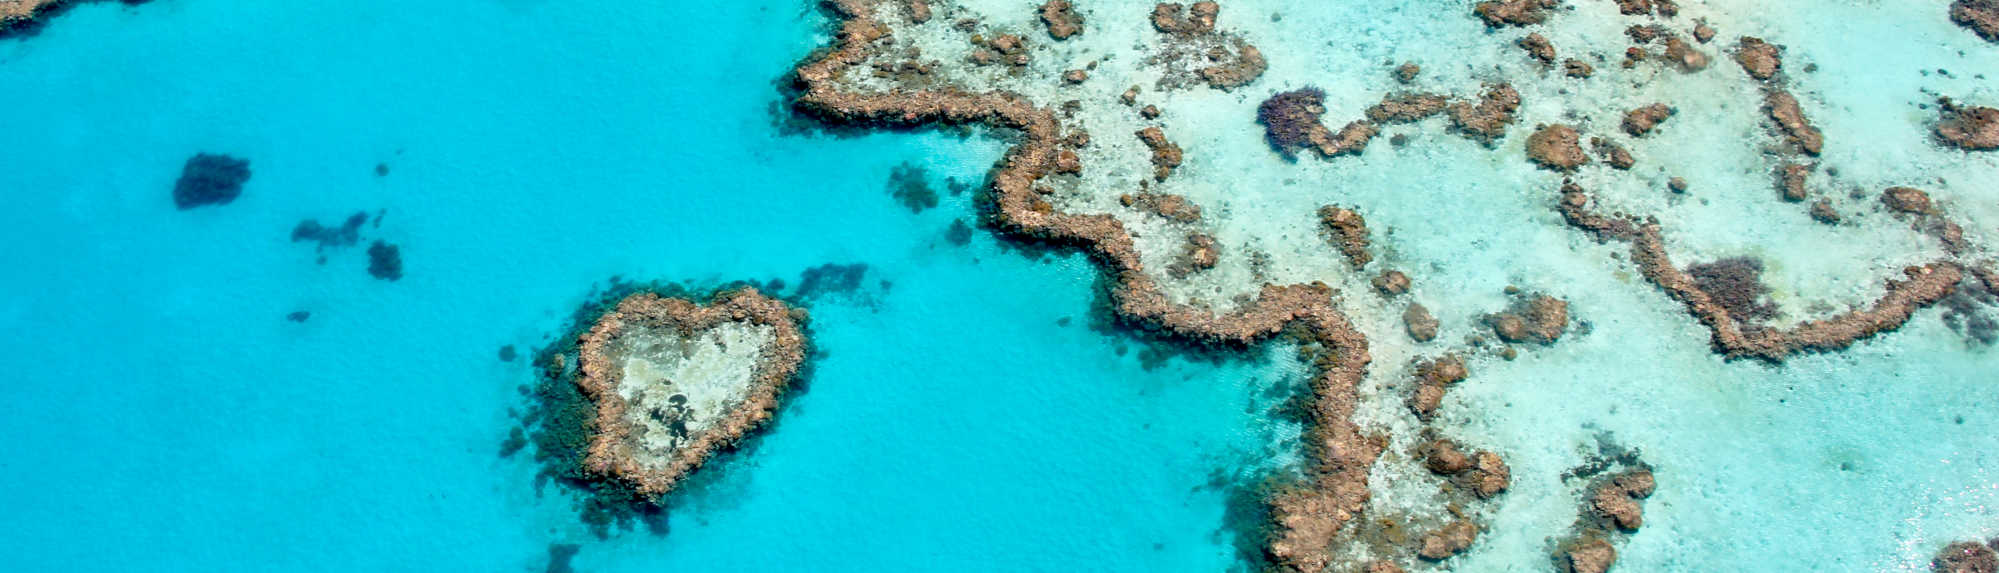 Seeing the Heart Reef in the Whitsundays